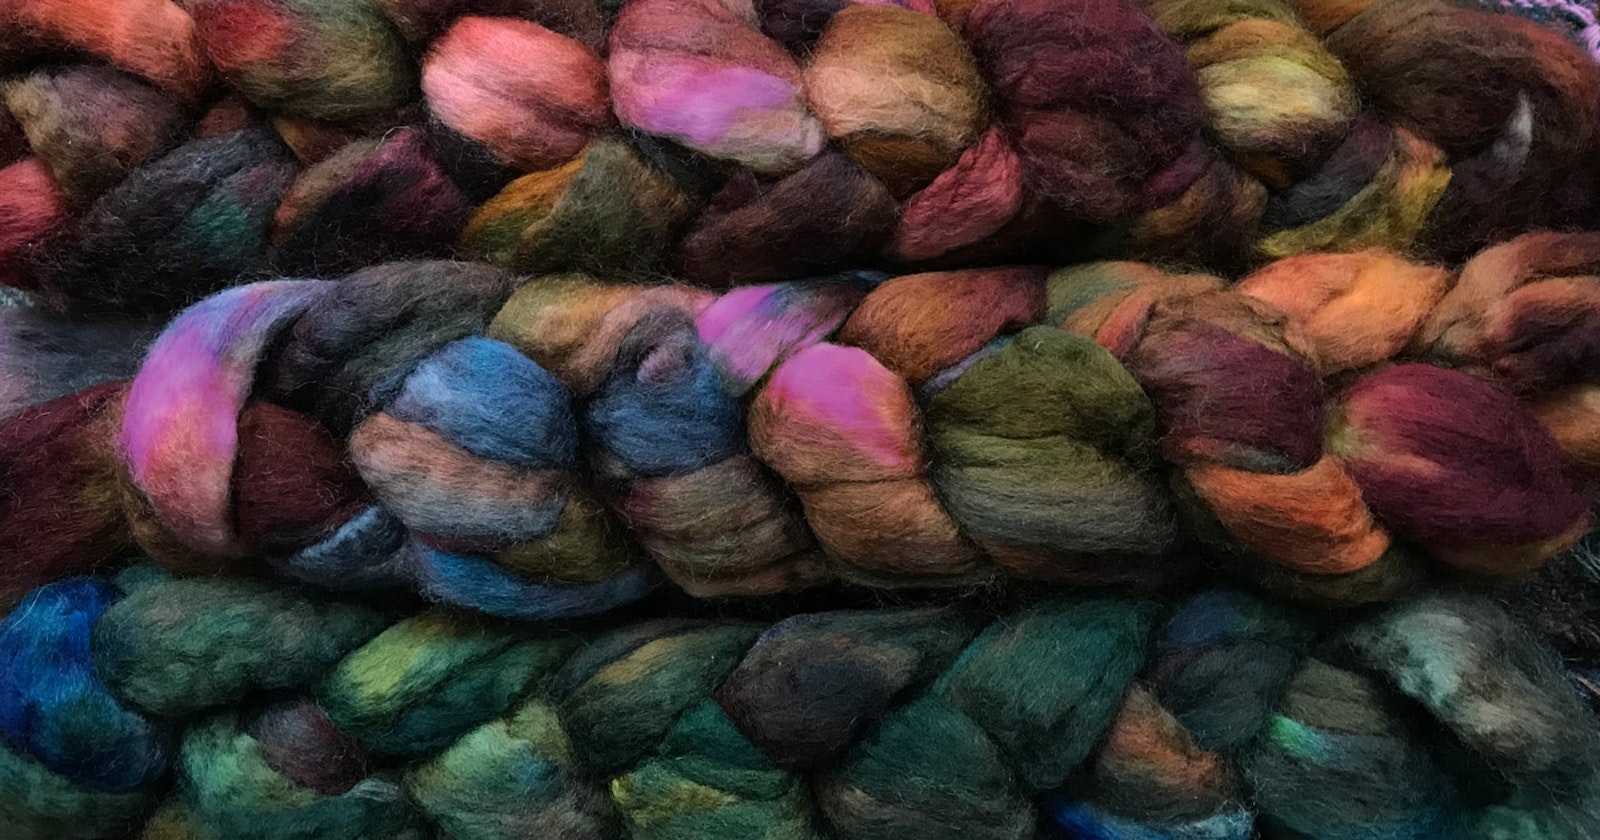 Spinning Novelty Yarn: Tips and Techniques for Creating Art Yarn, FREE  Guide!